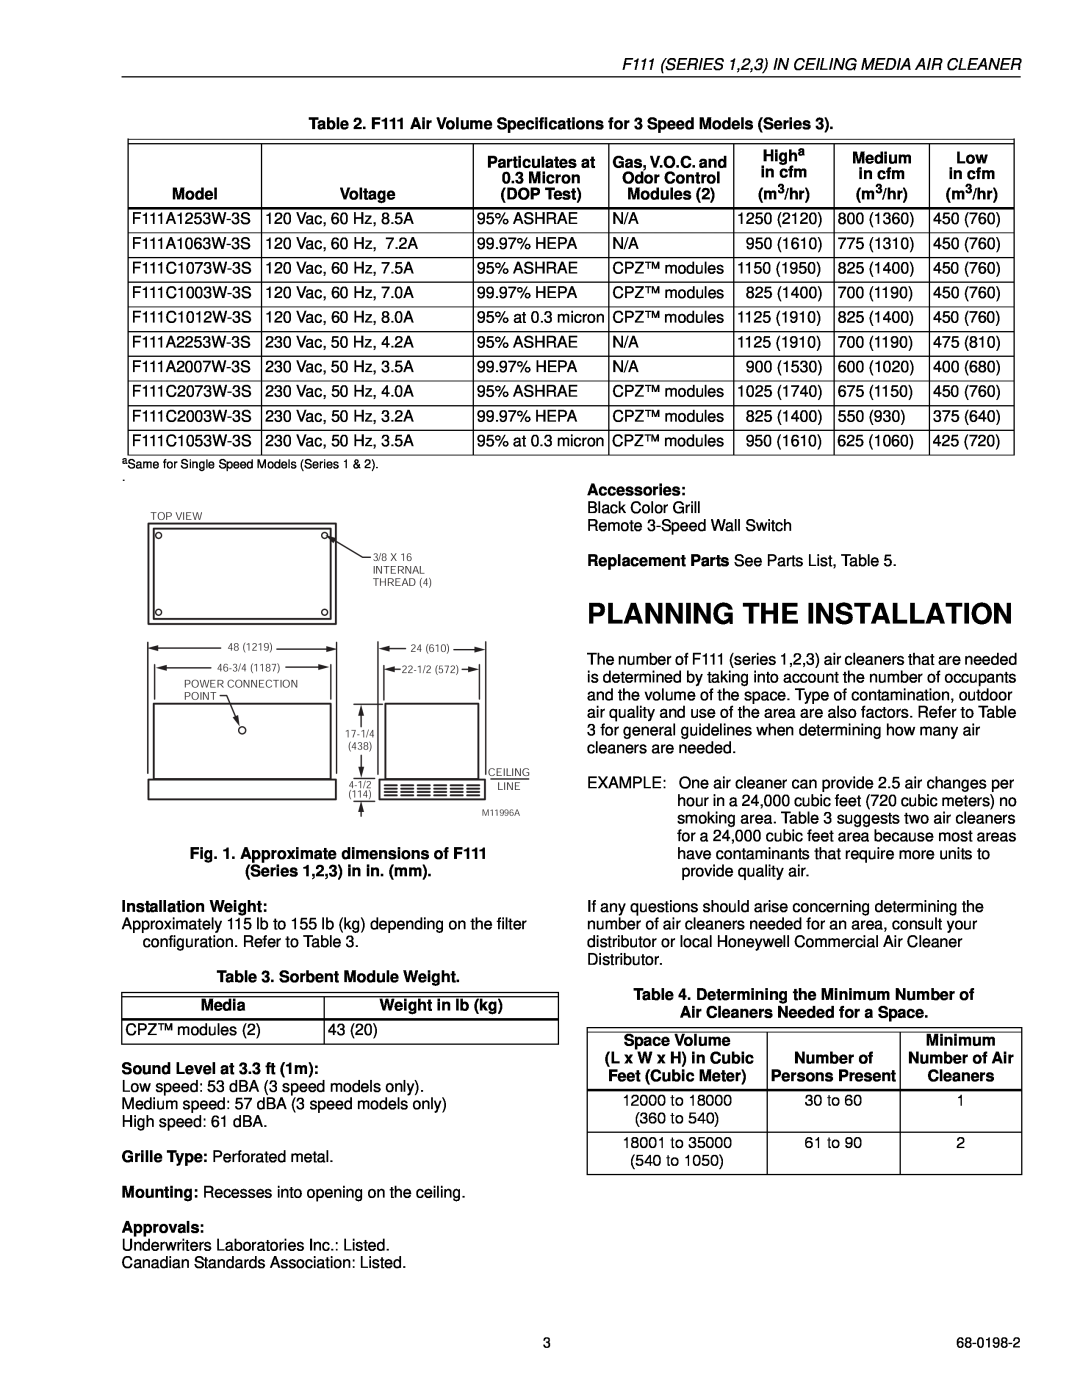 Honeywell F111 Series 3 specifications Planning The Installation 